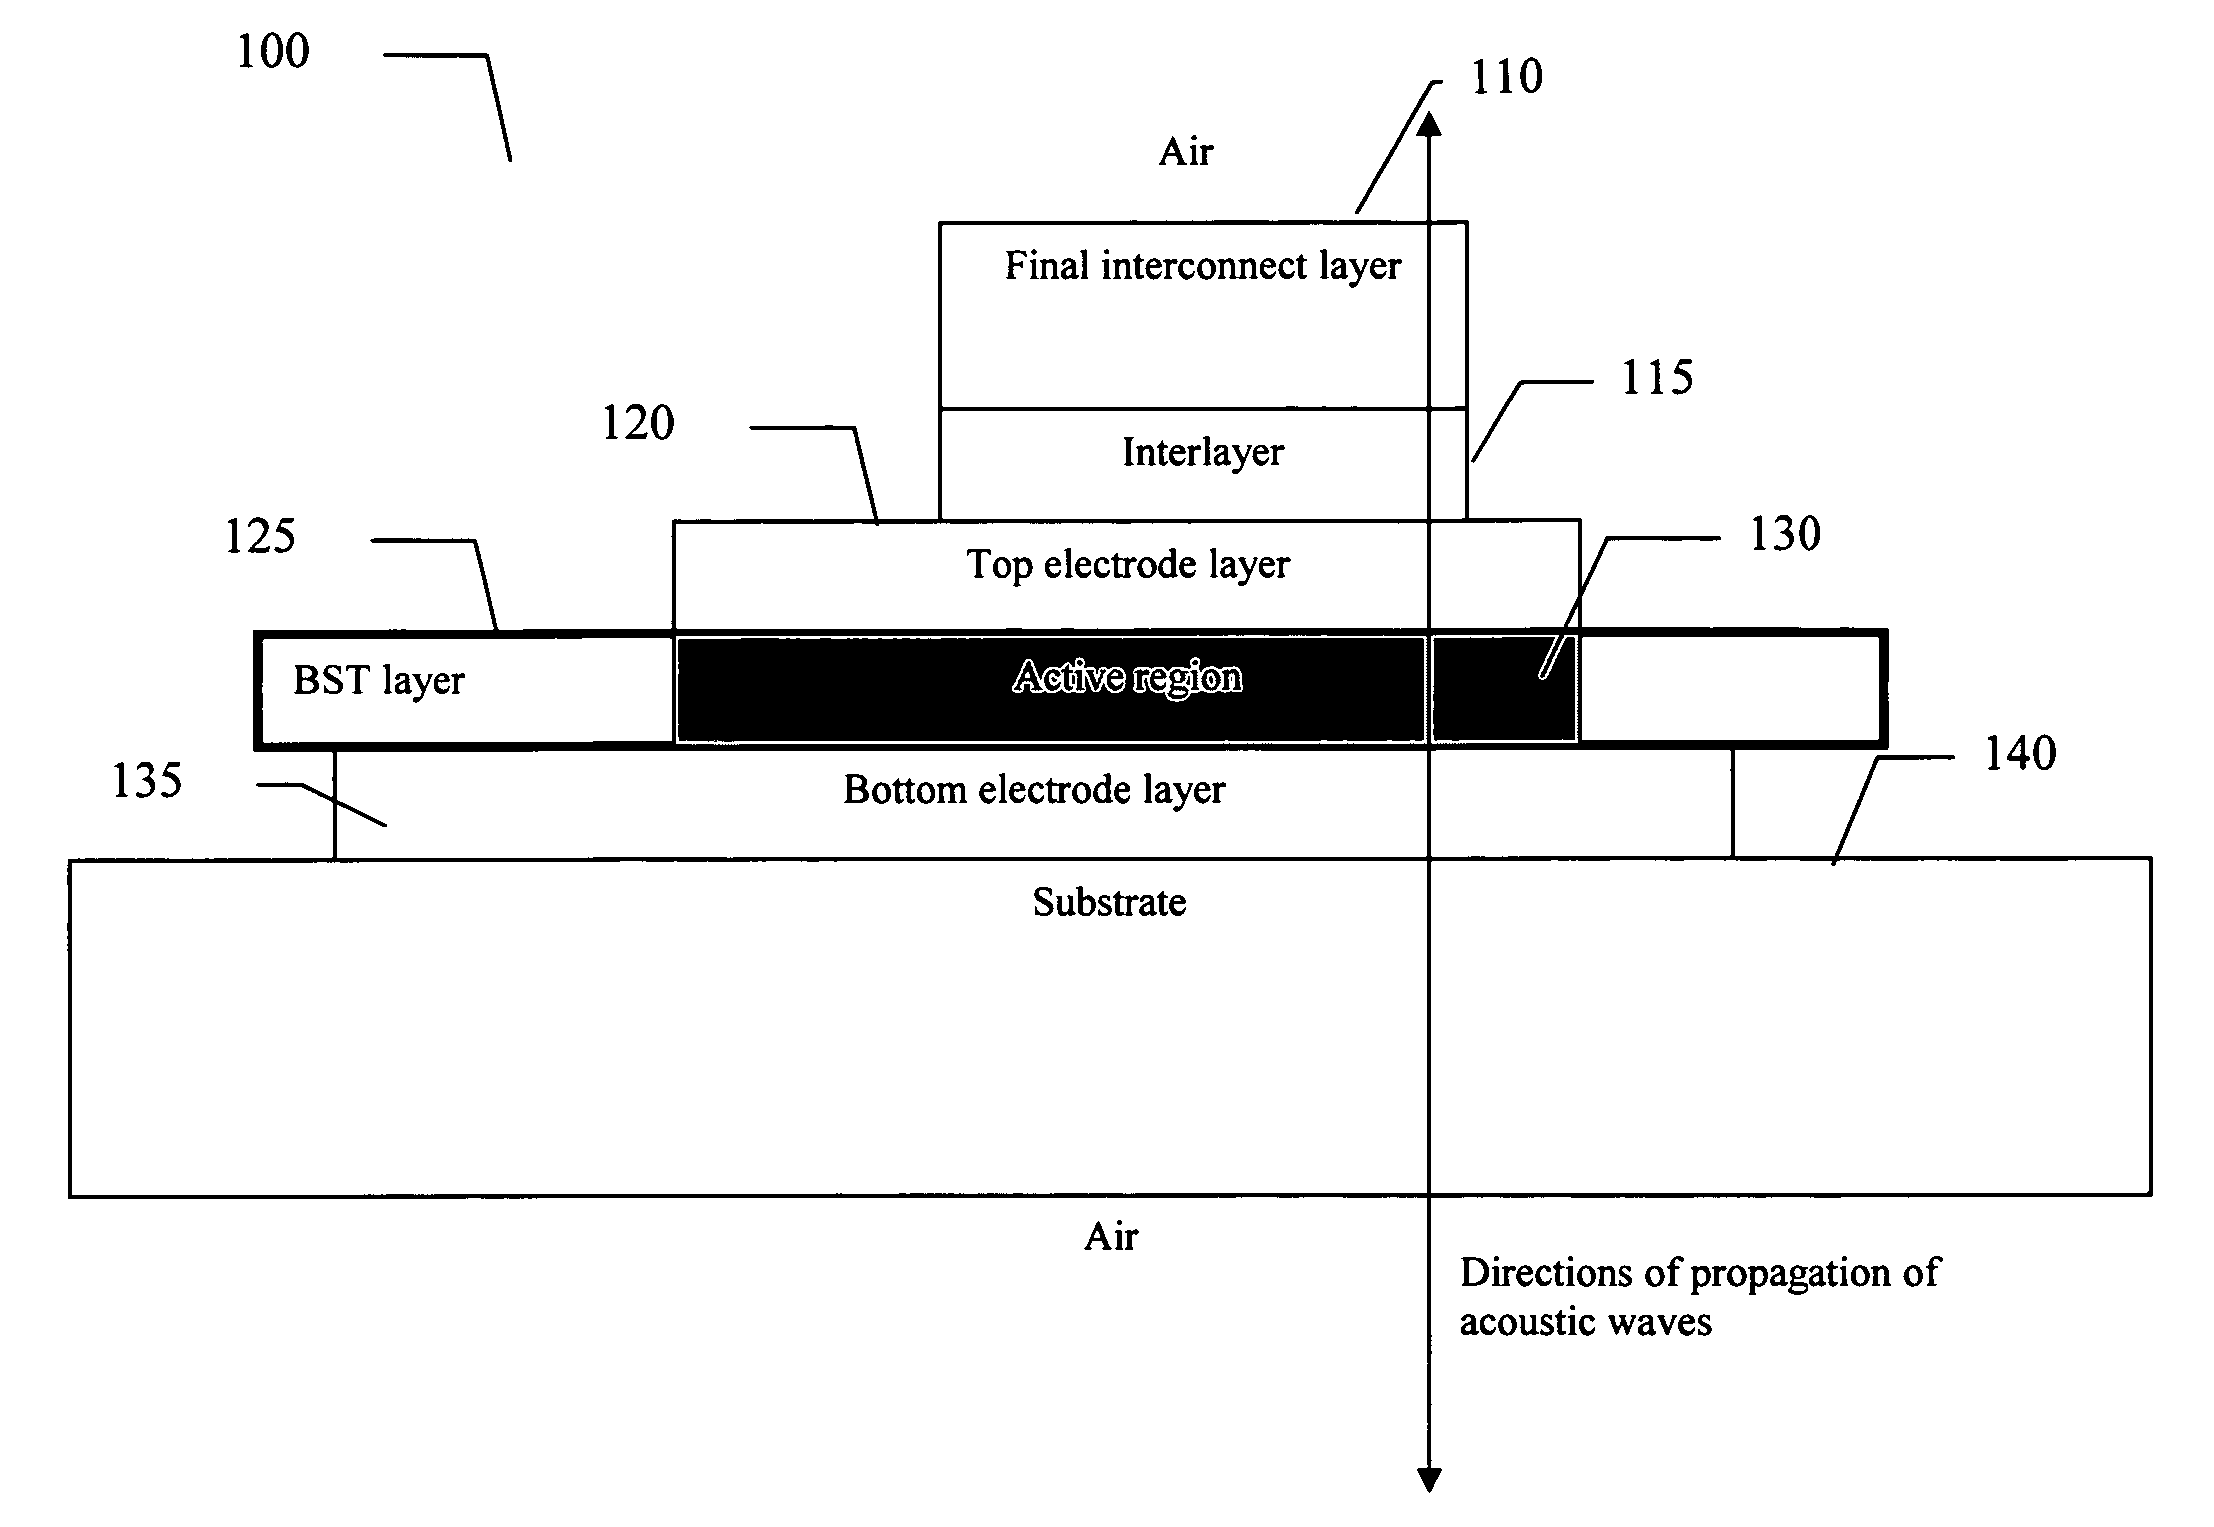 Apparatus and method capable of a high fundamental acoustic resonance frequency and a wide resonance-free frequency range